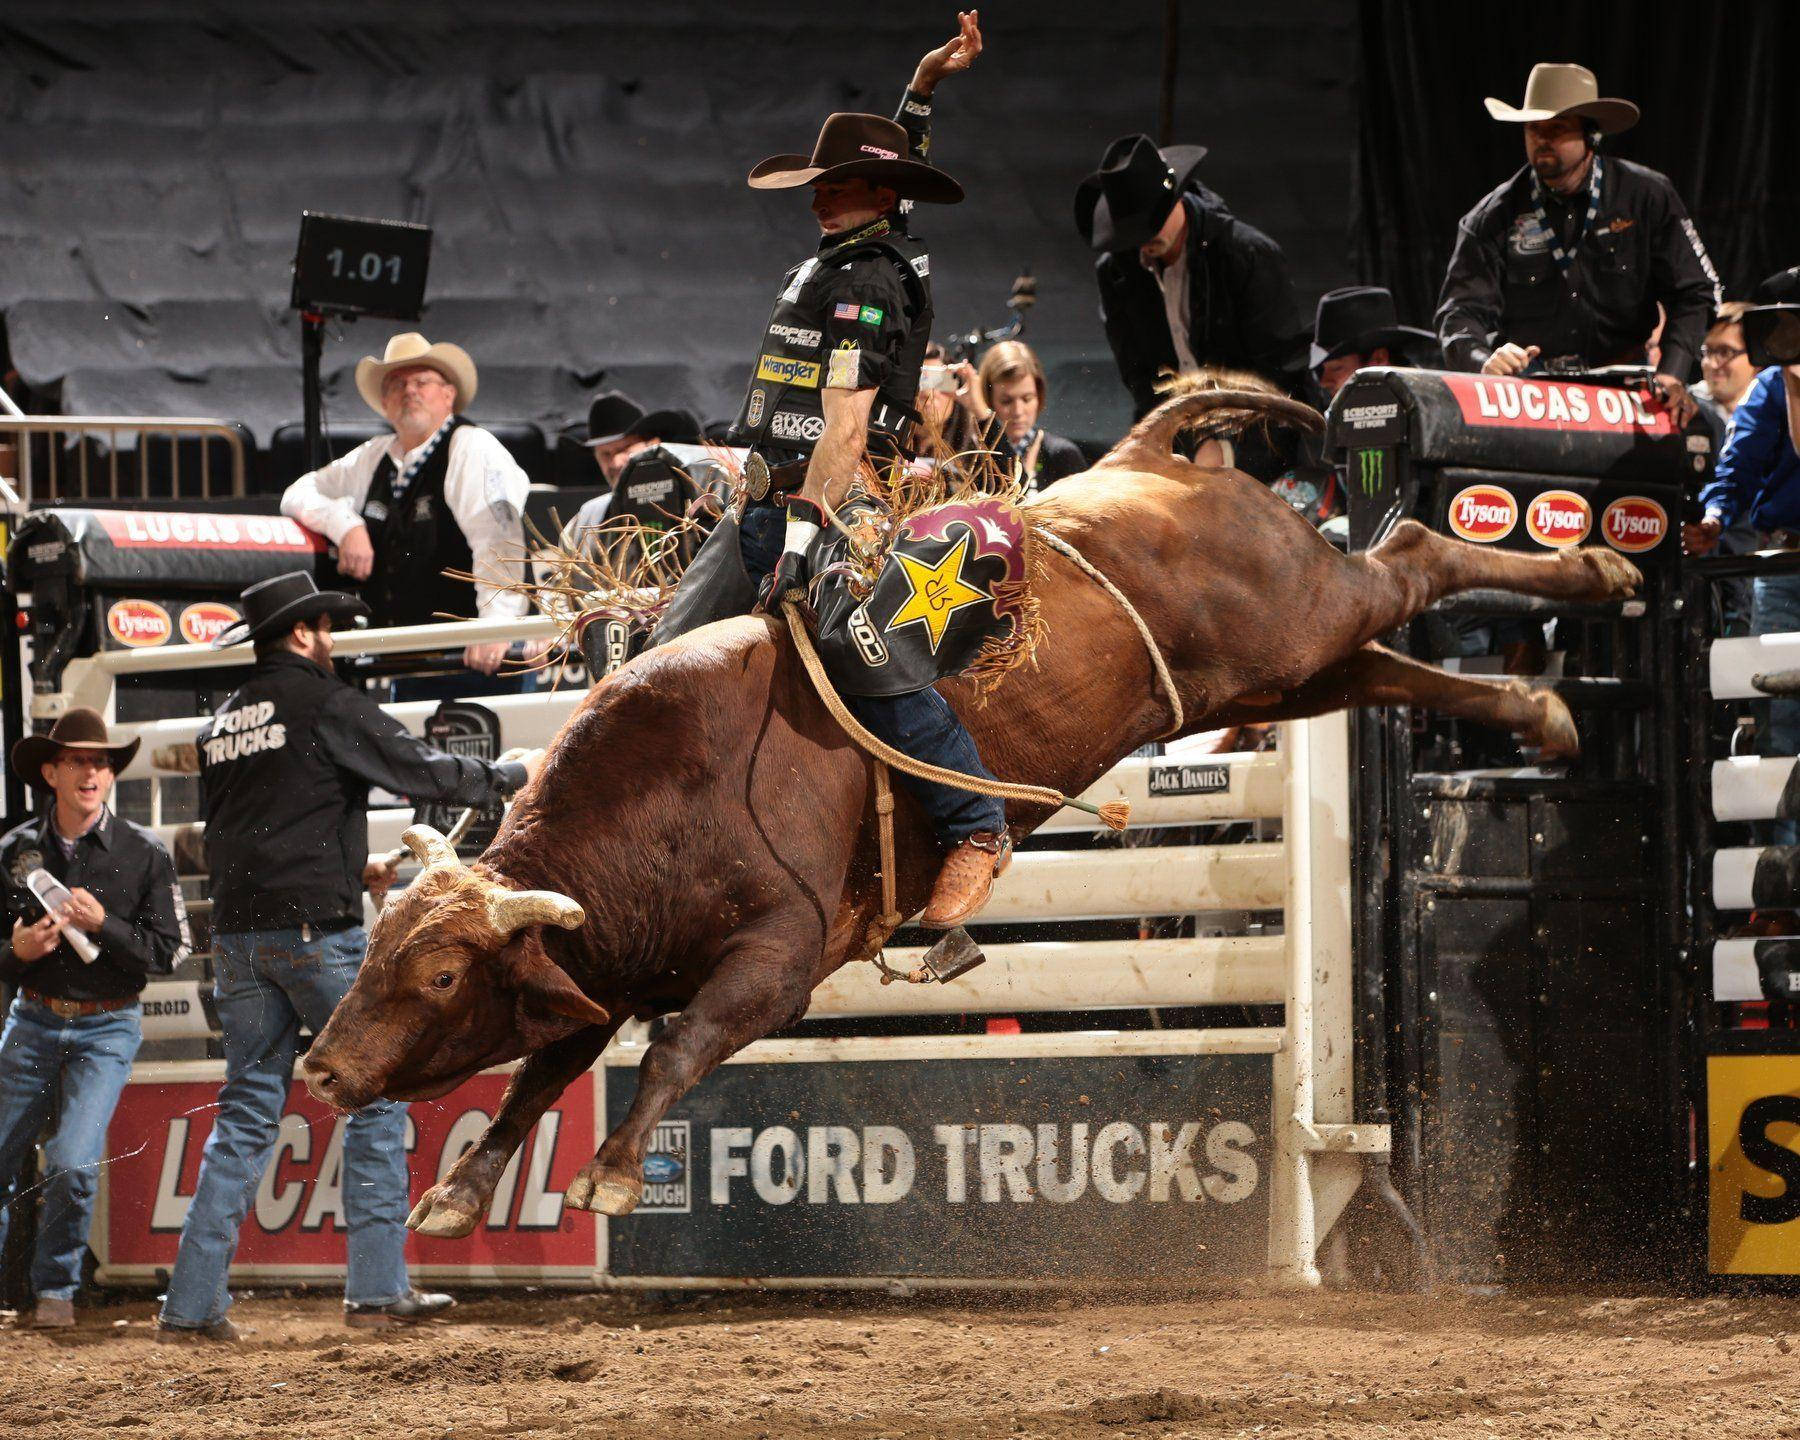 Professional Bull Rider Proudly Competing In An Arena